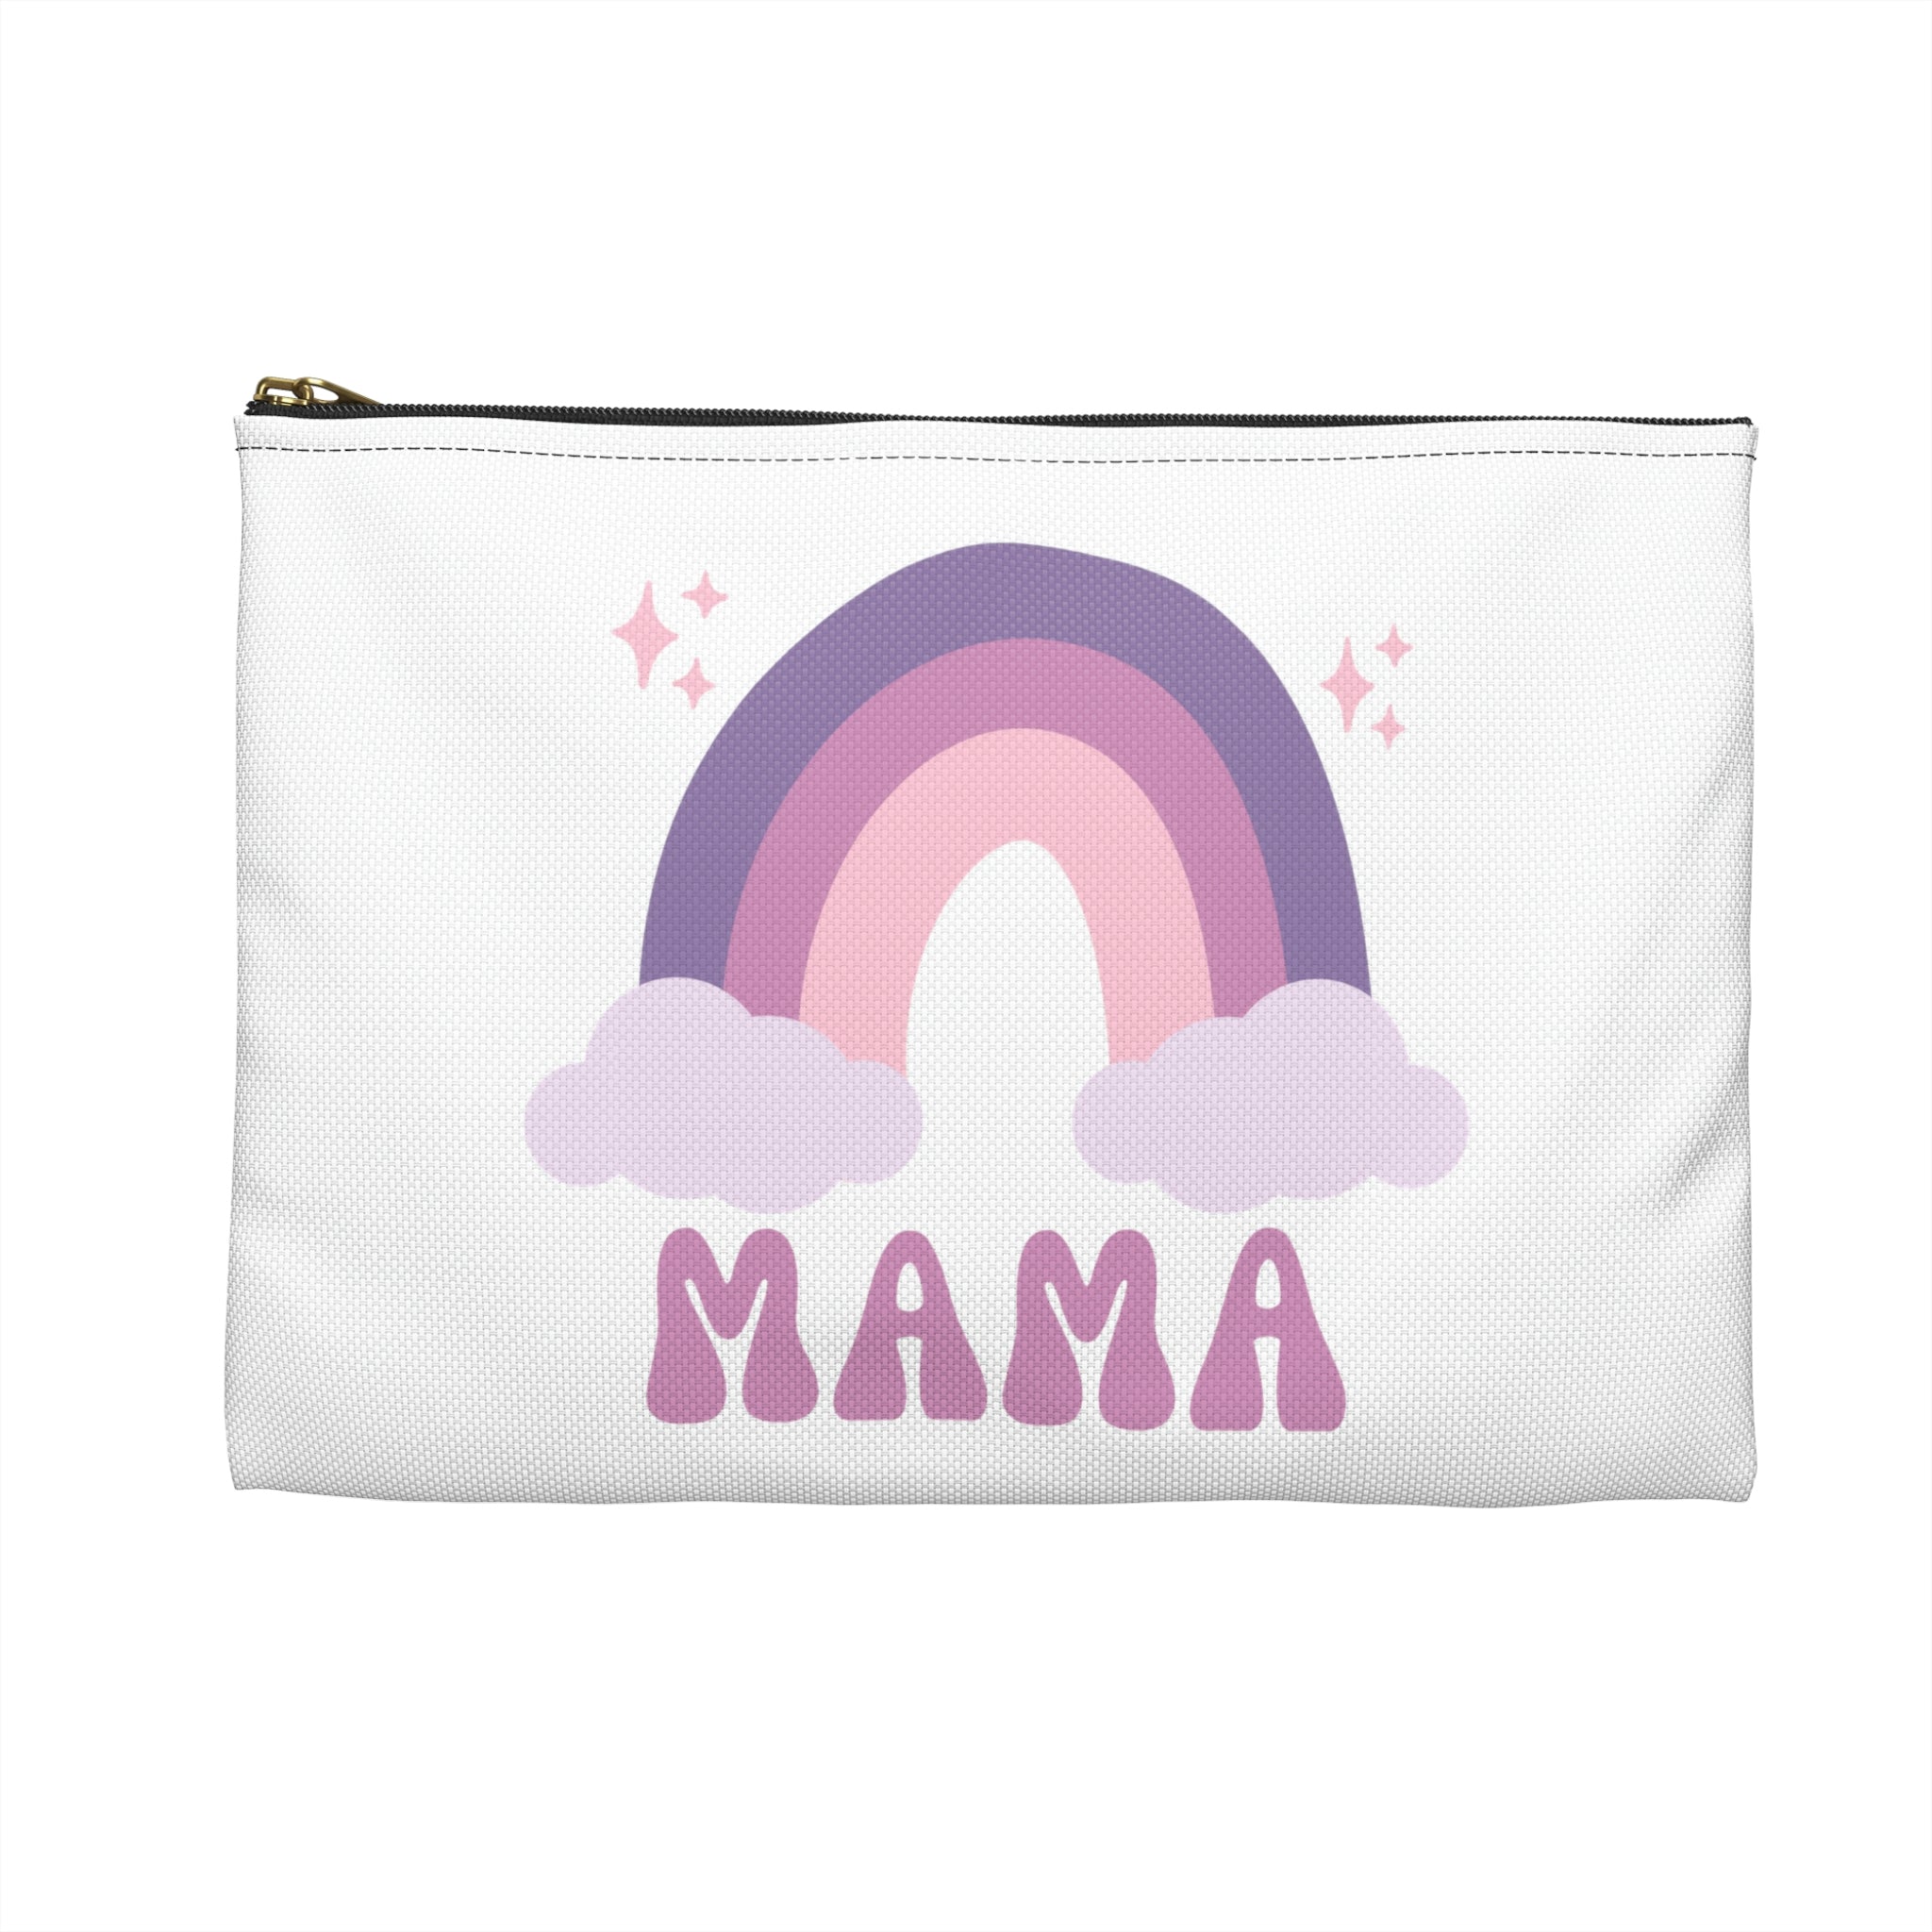 Rainbow Mama Colorful Design Accessory Pouch Bag